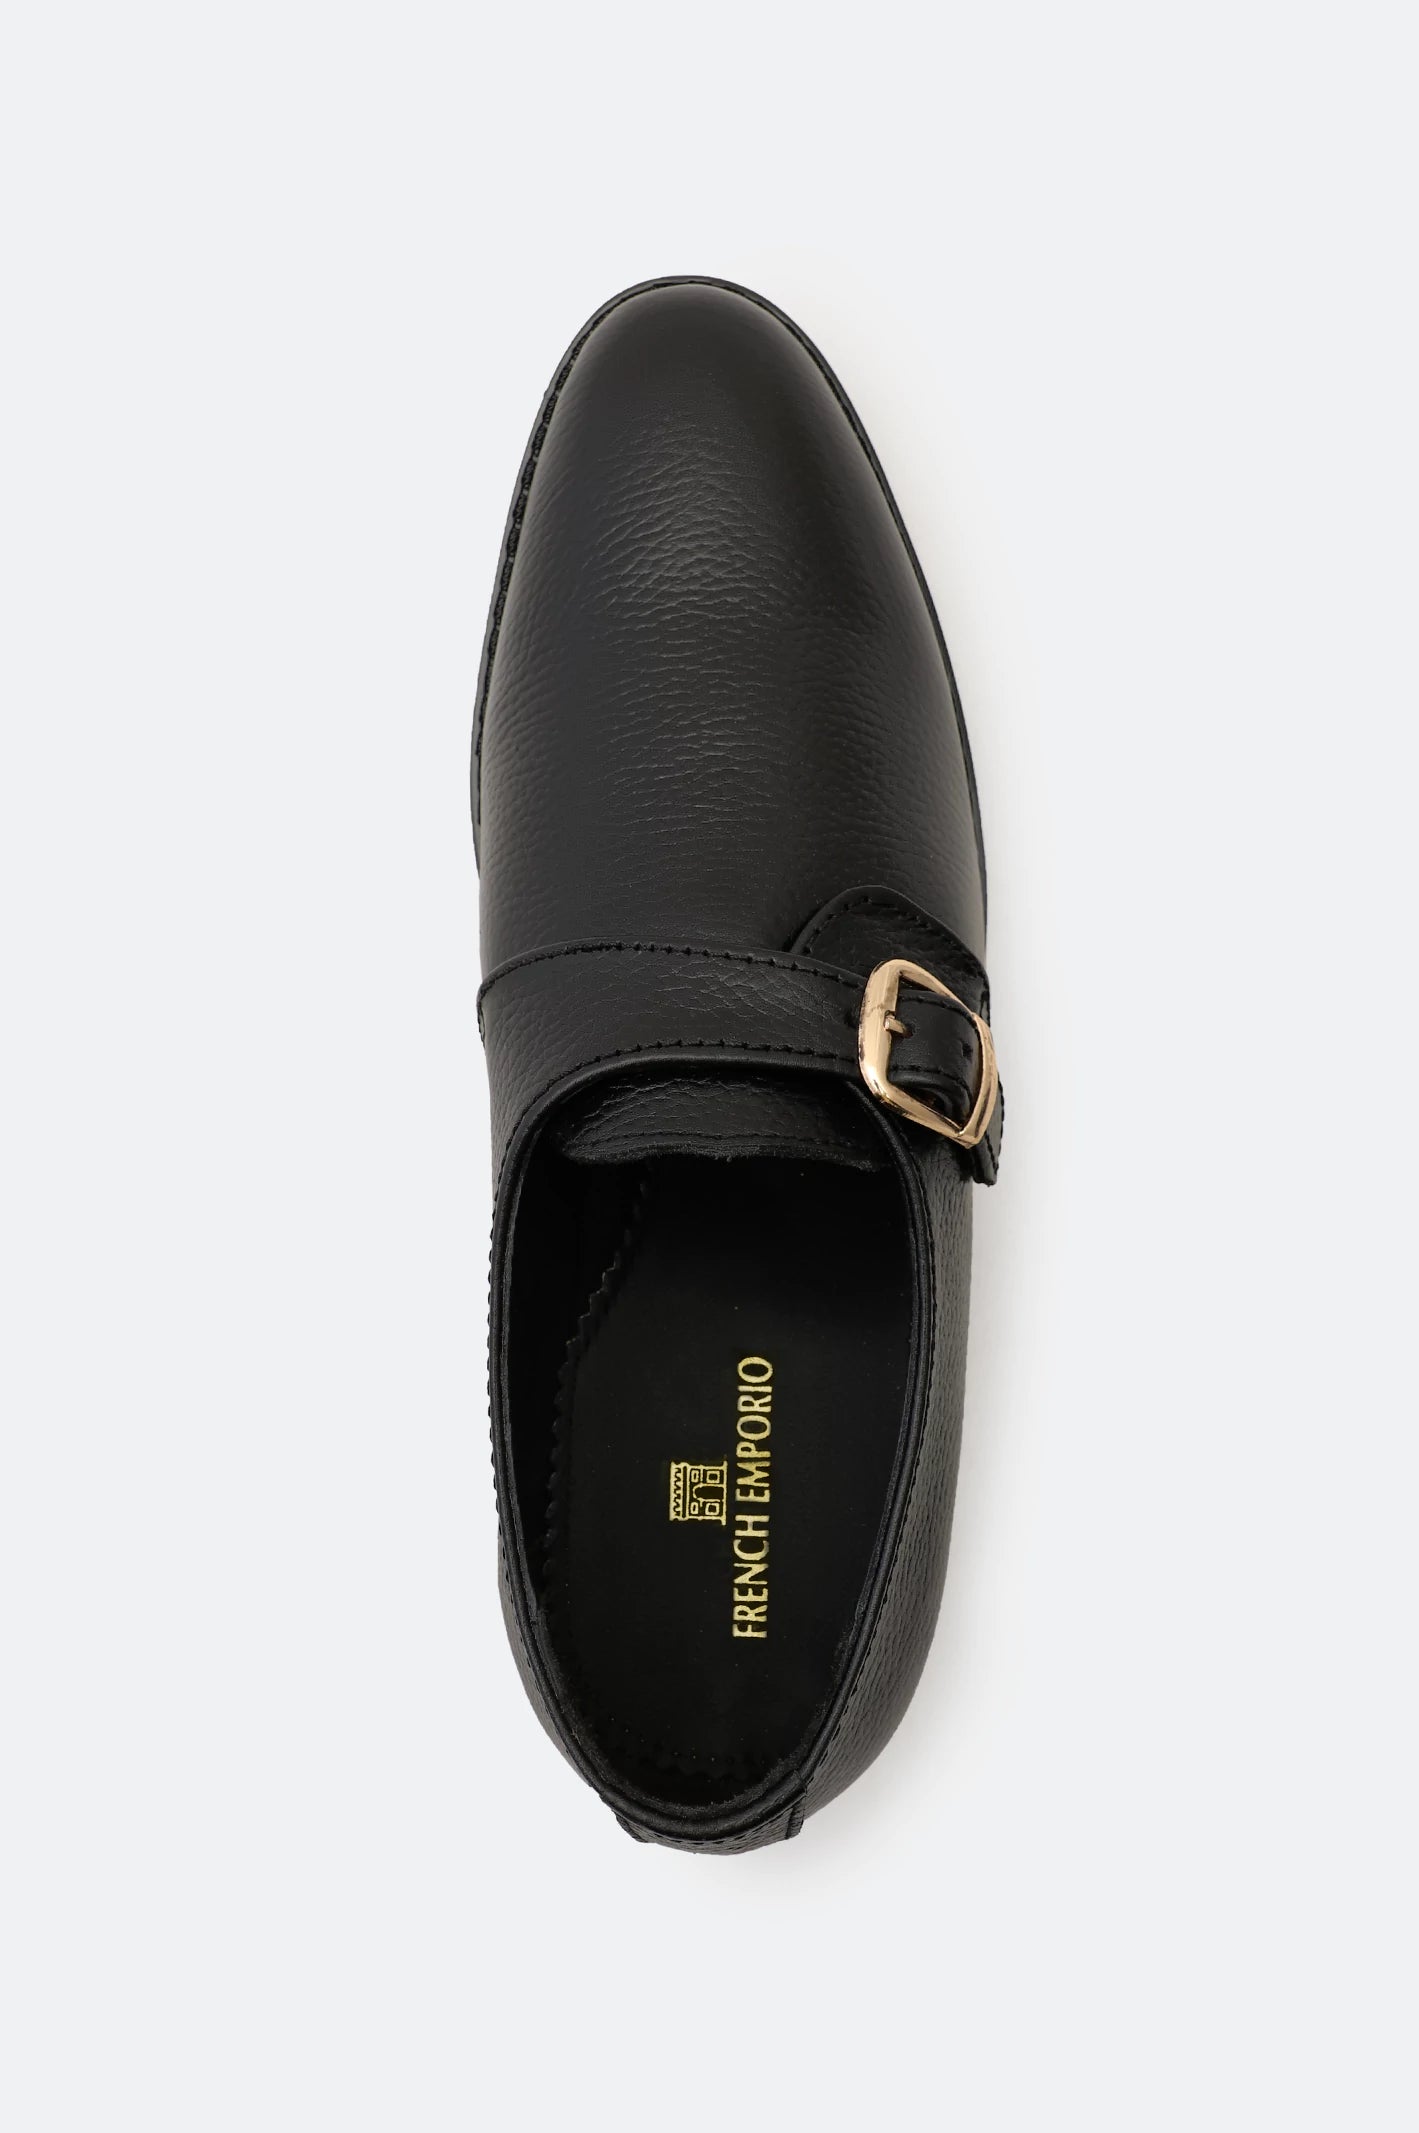 Black Formal Monk Shoes From Diners